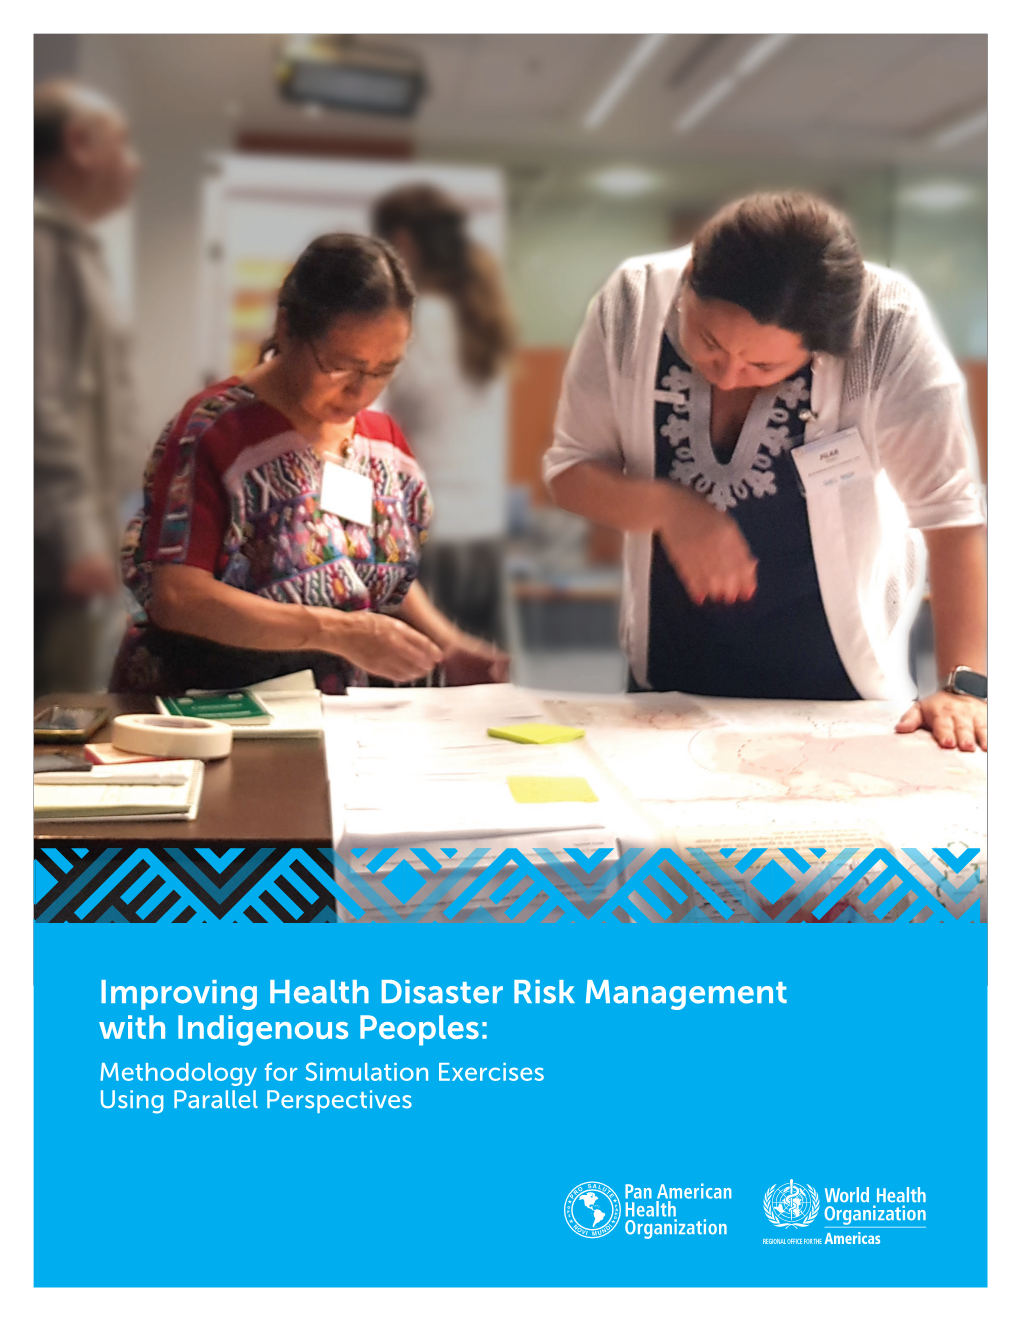 Improving Health Disaster Risk Management with Indigenous Peoples: Methodology for Simulation Exercises Using Parallel Perspectives